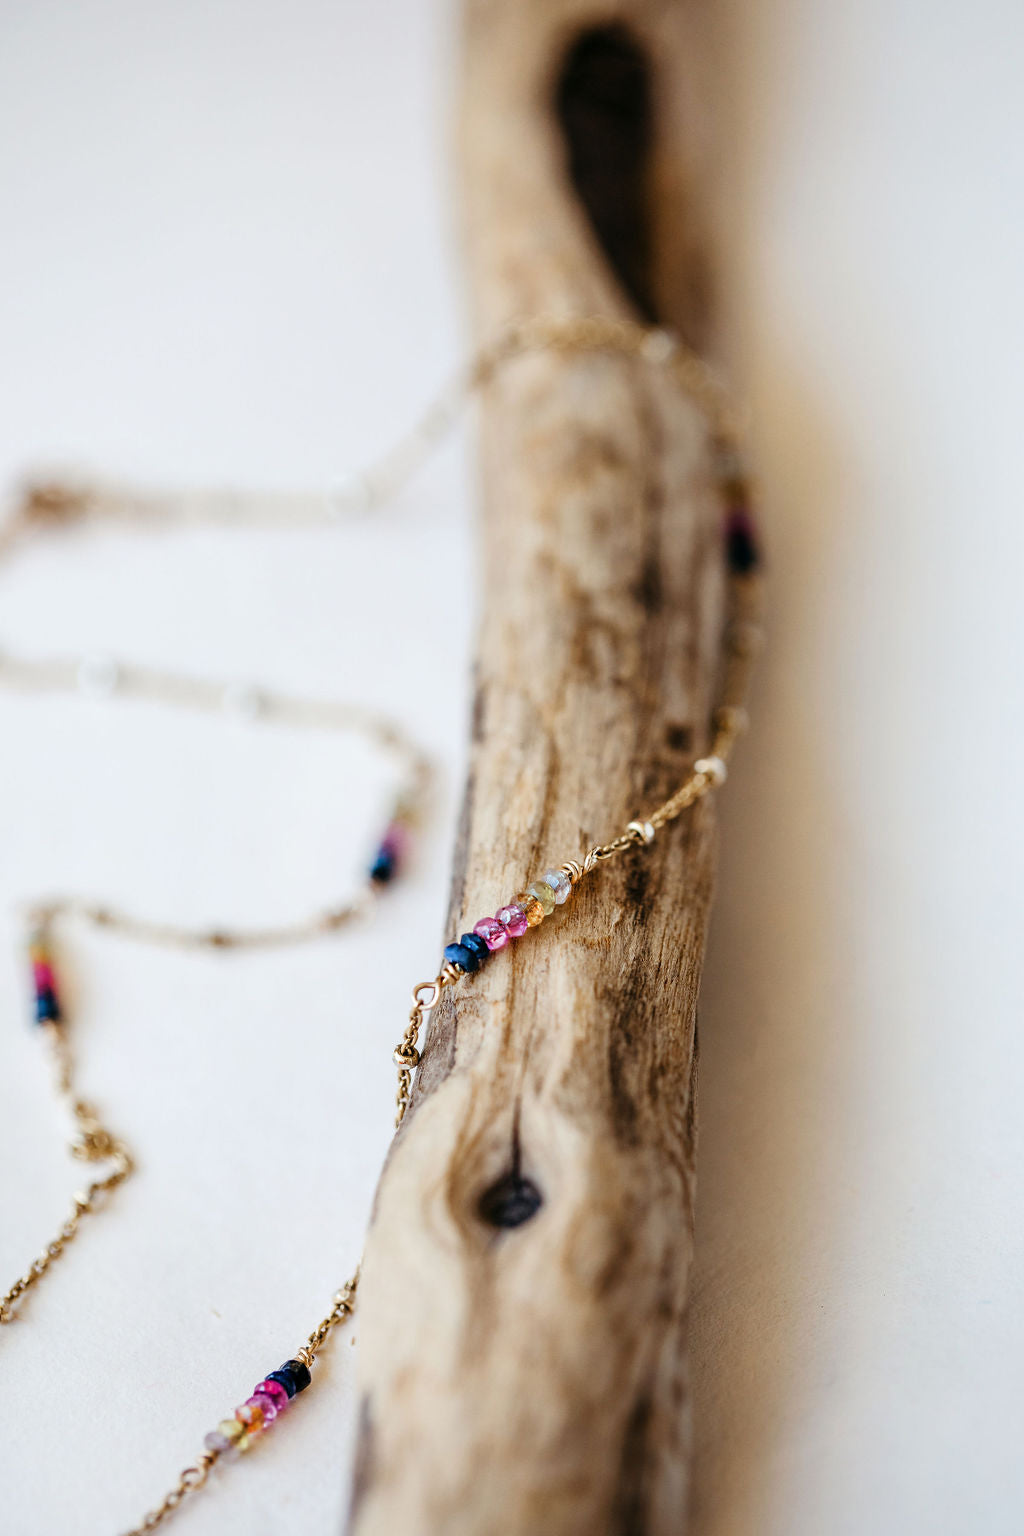 Sapphire Layering Necklace